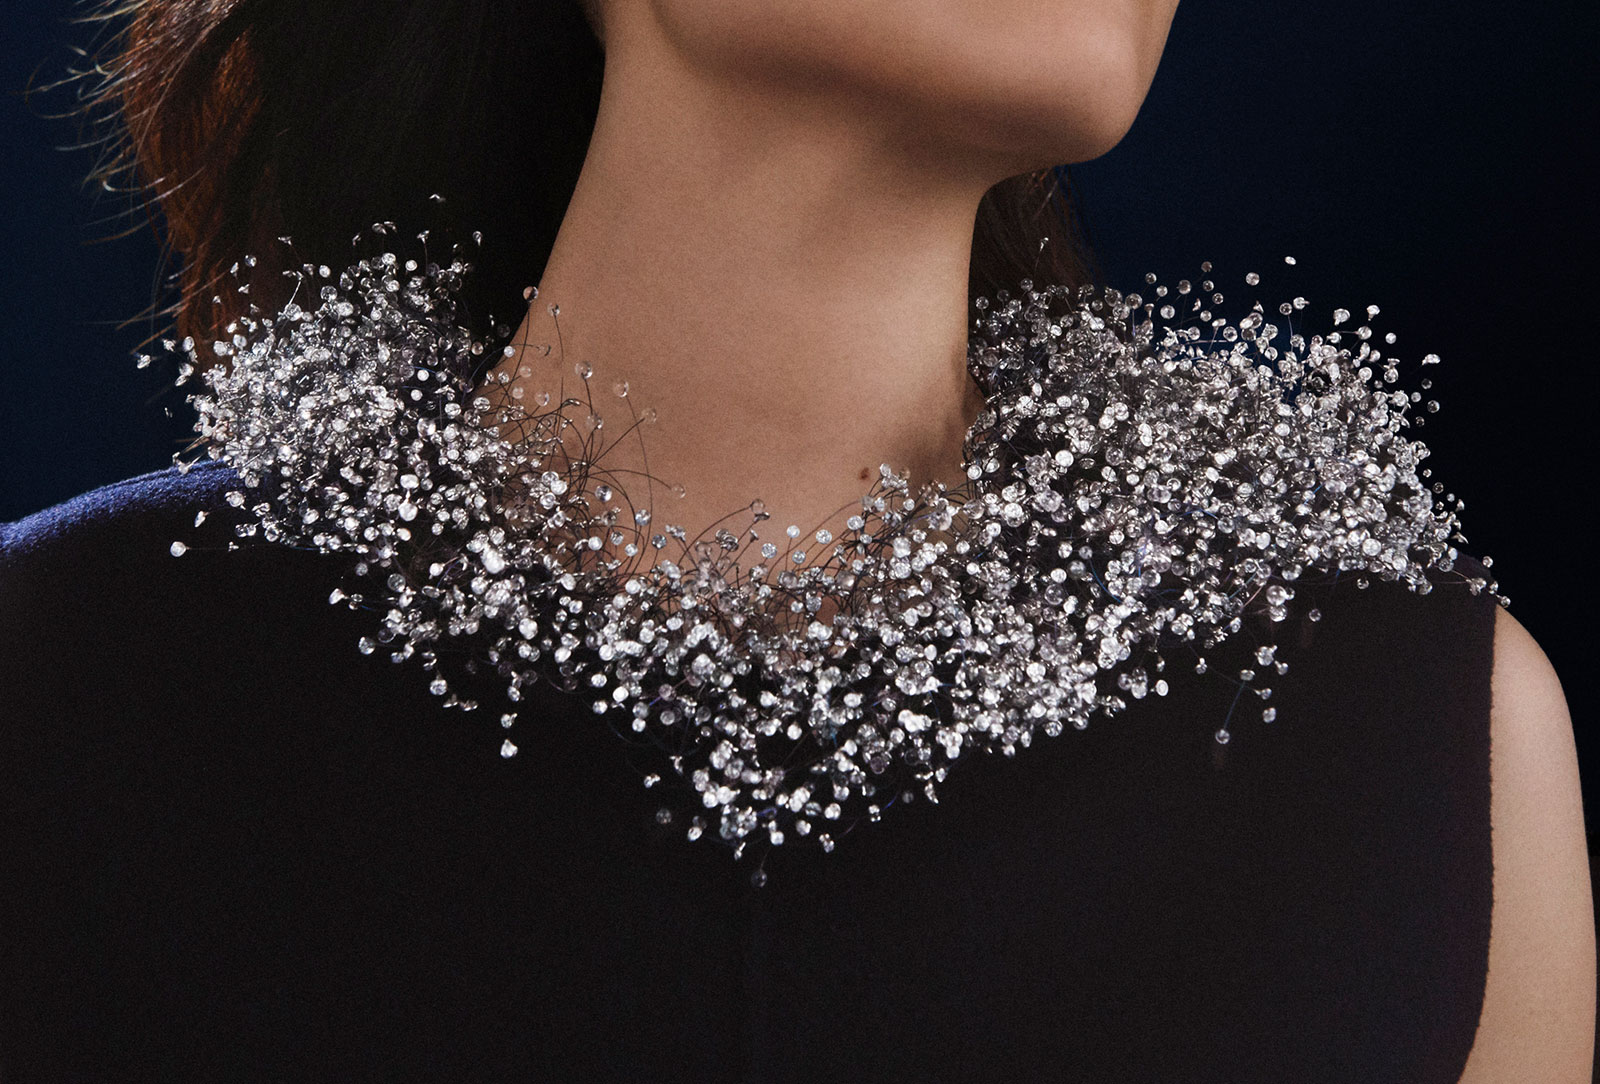 A total of 4,018 diamonds and miniature glass beads were strung on fine titanium threads to create the Nuage en Apesanteur high jewellery necklace